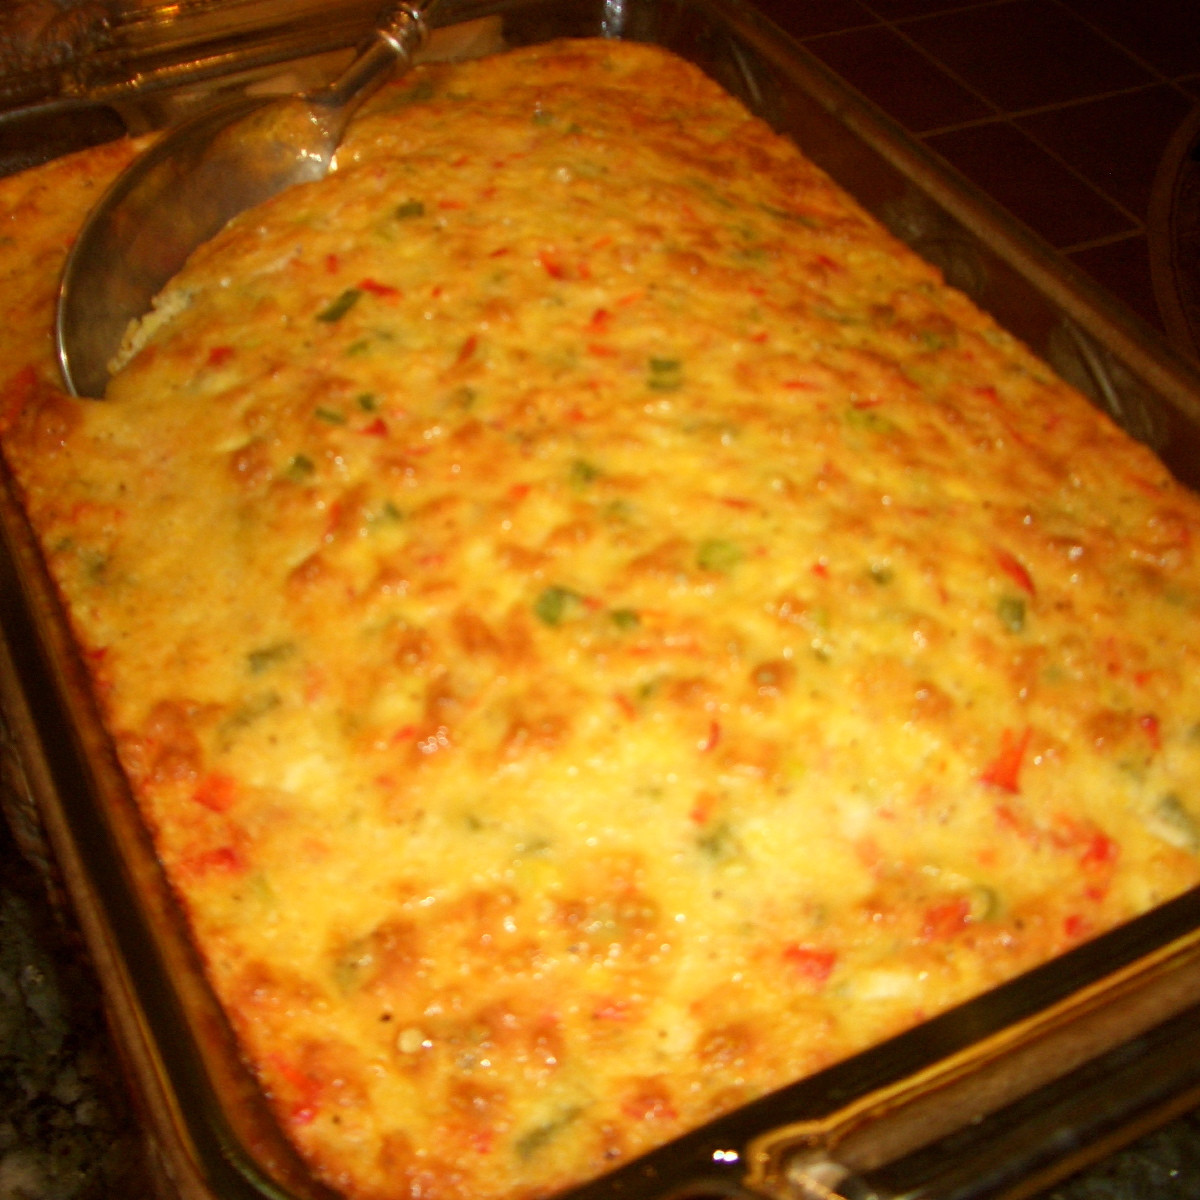 Breakfast Quiche Recipe
 PREPARE AN EASY MAKE AHEAD BRUNCH WITH THIS CRUSTLESS